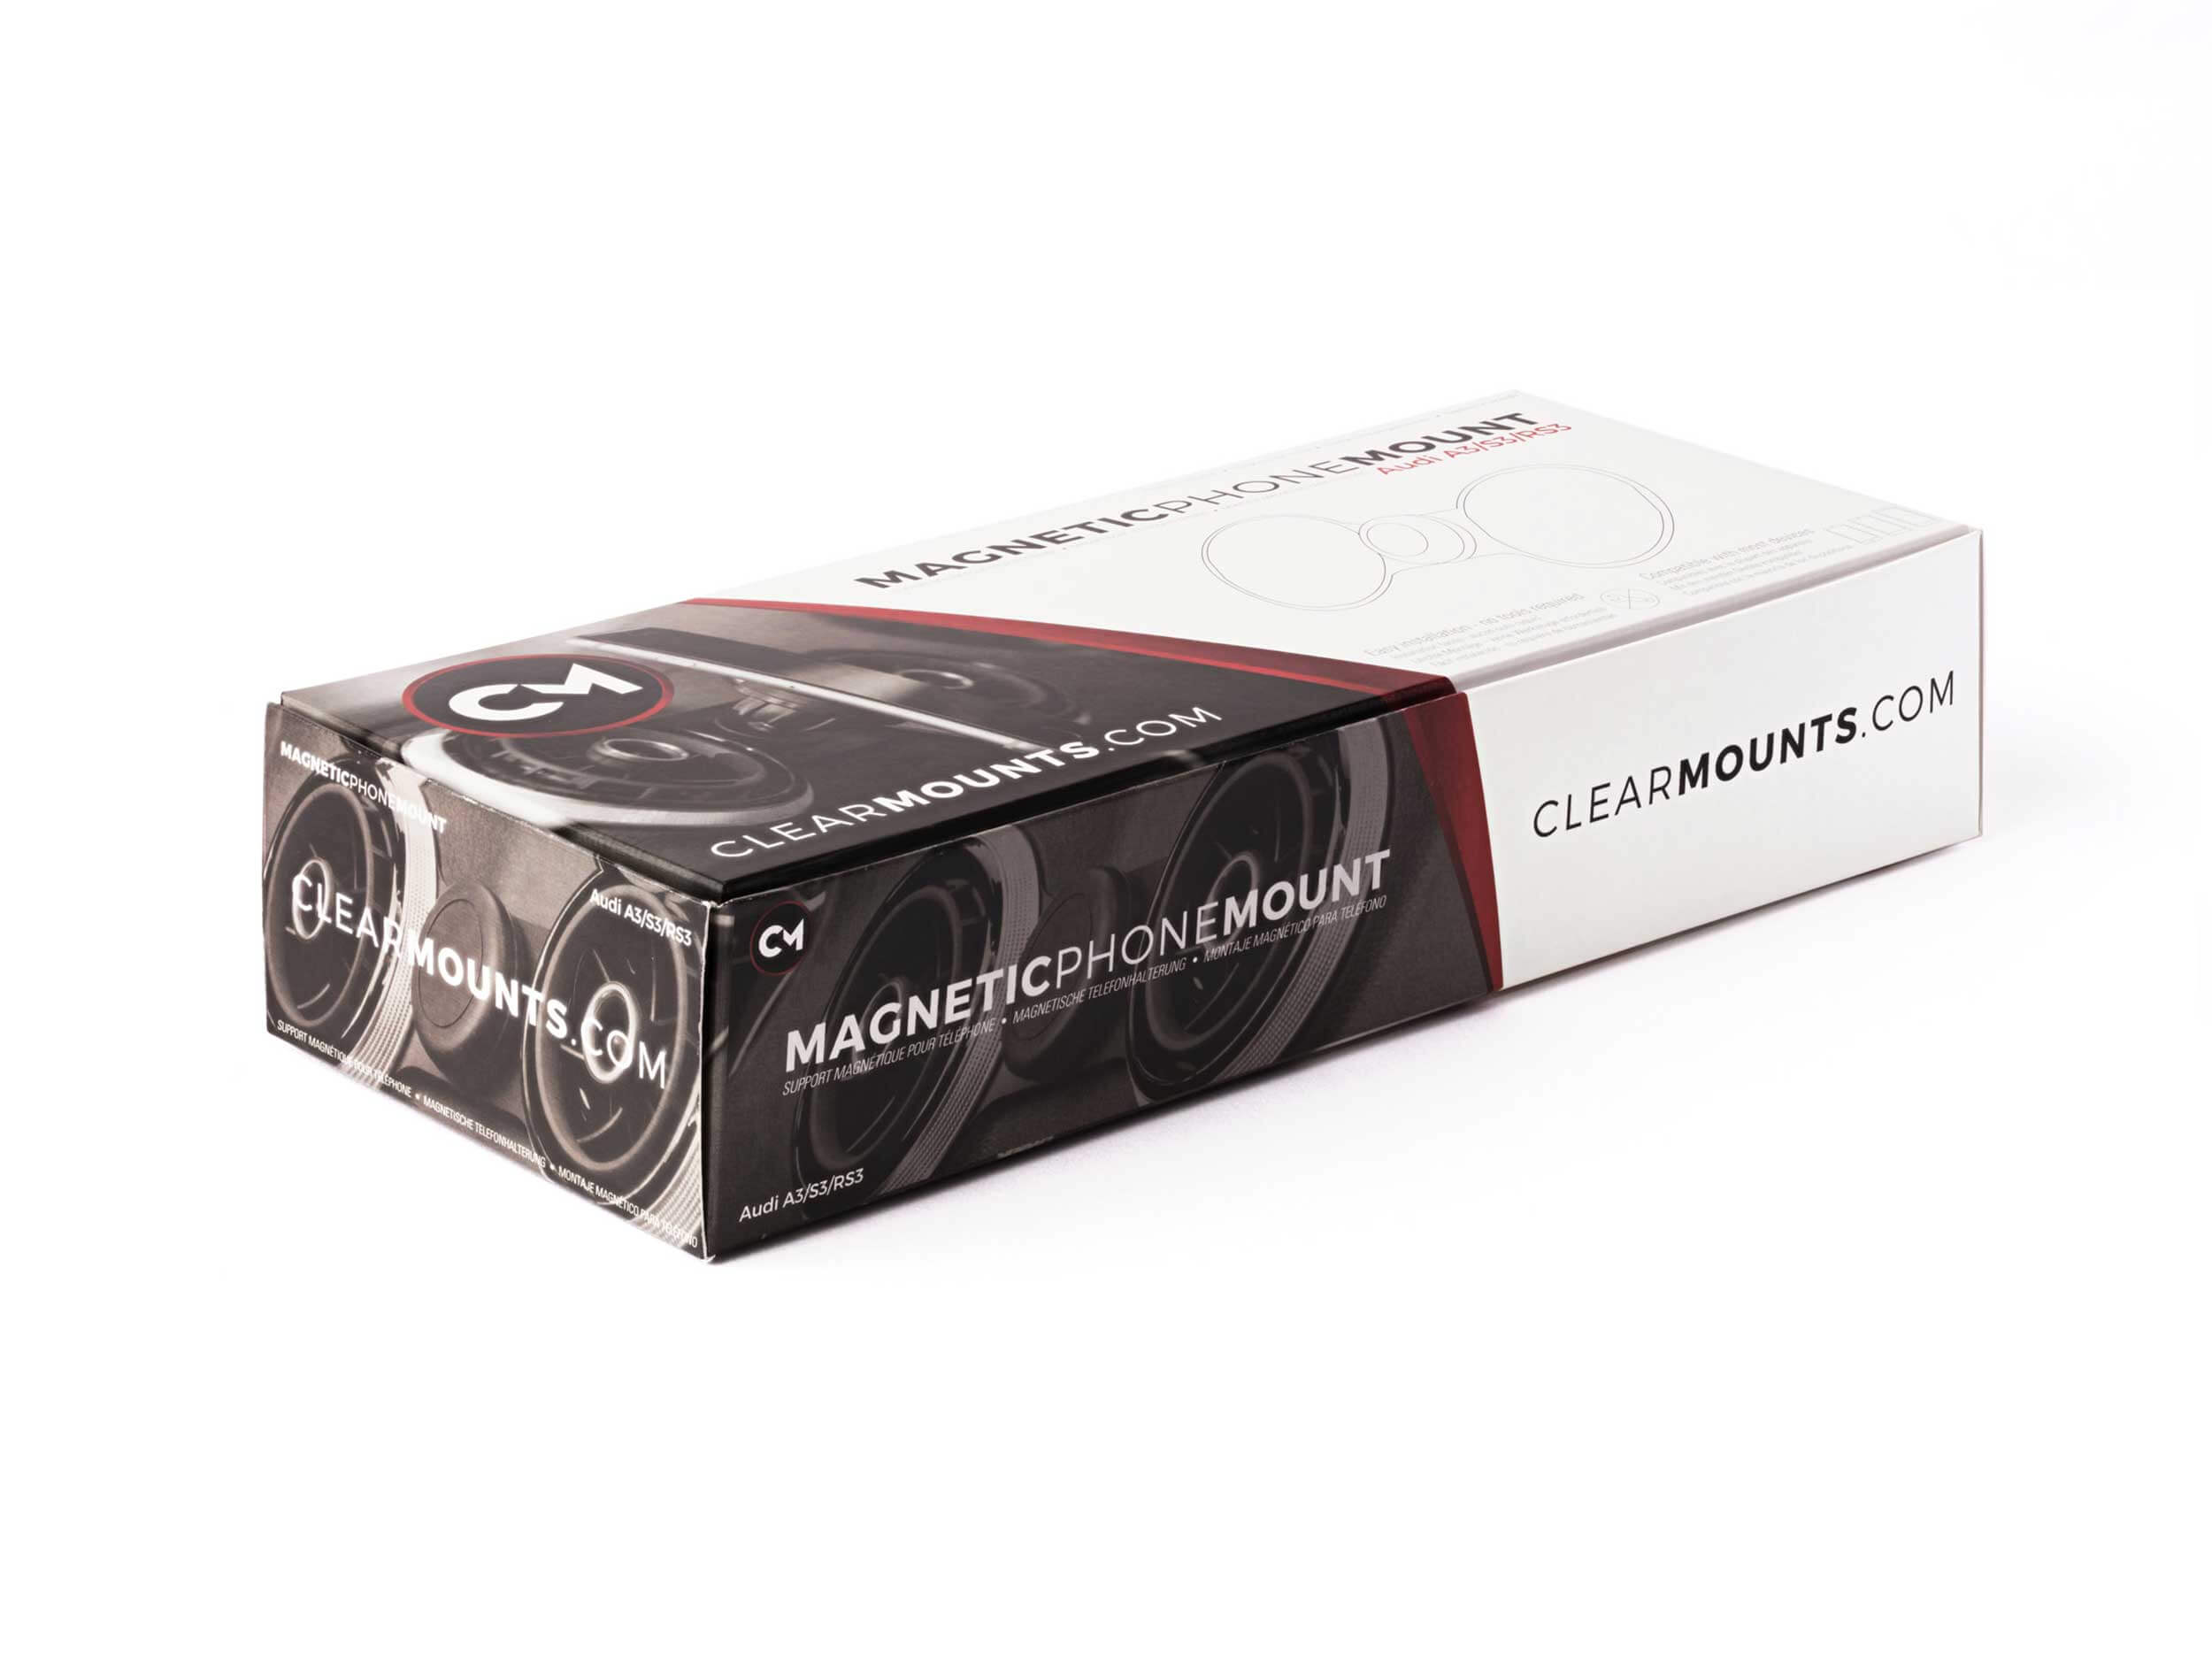 Clearmounts – Packaging 08